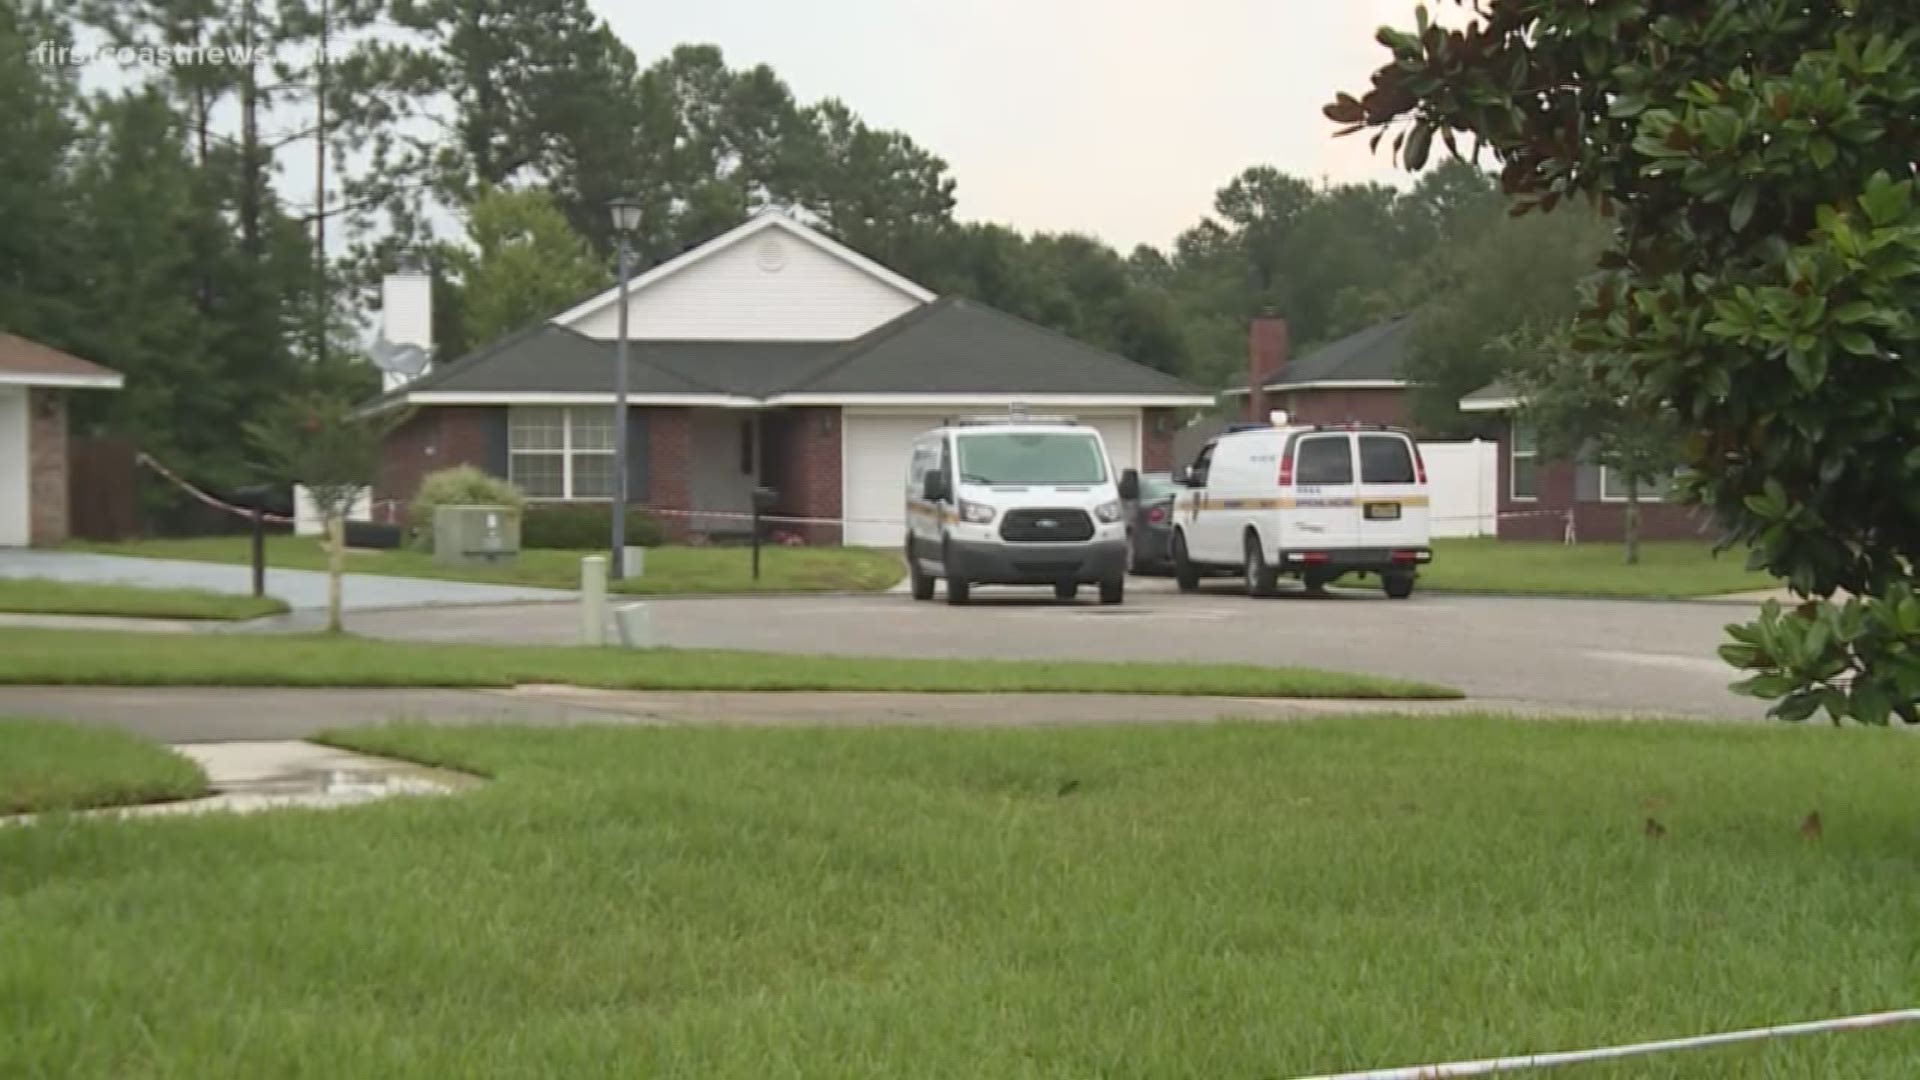 Neighbors were shocked upon learning that a woman was found dead in a pool of blood inside a Westside home.